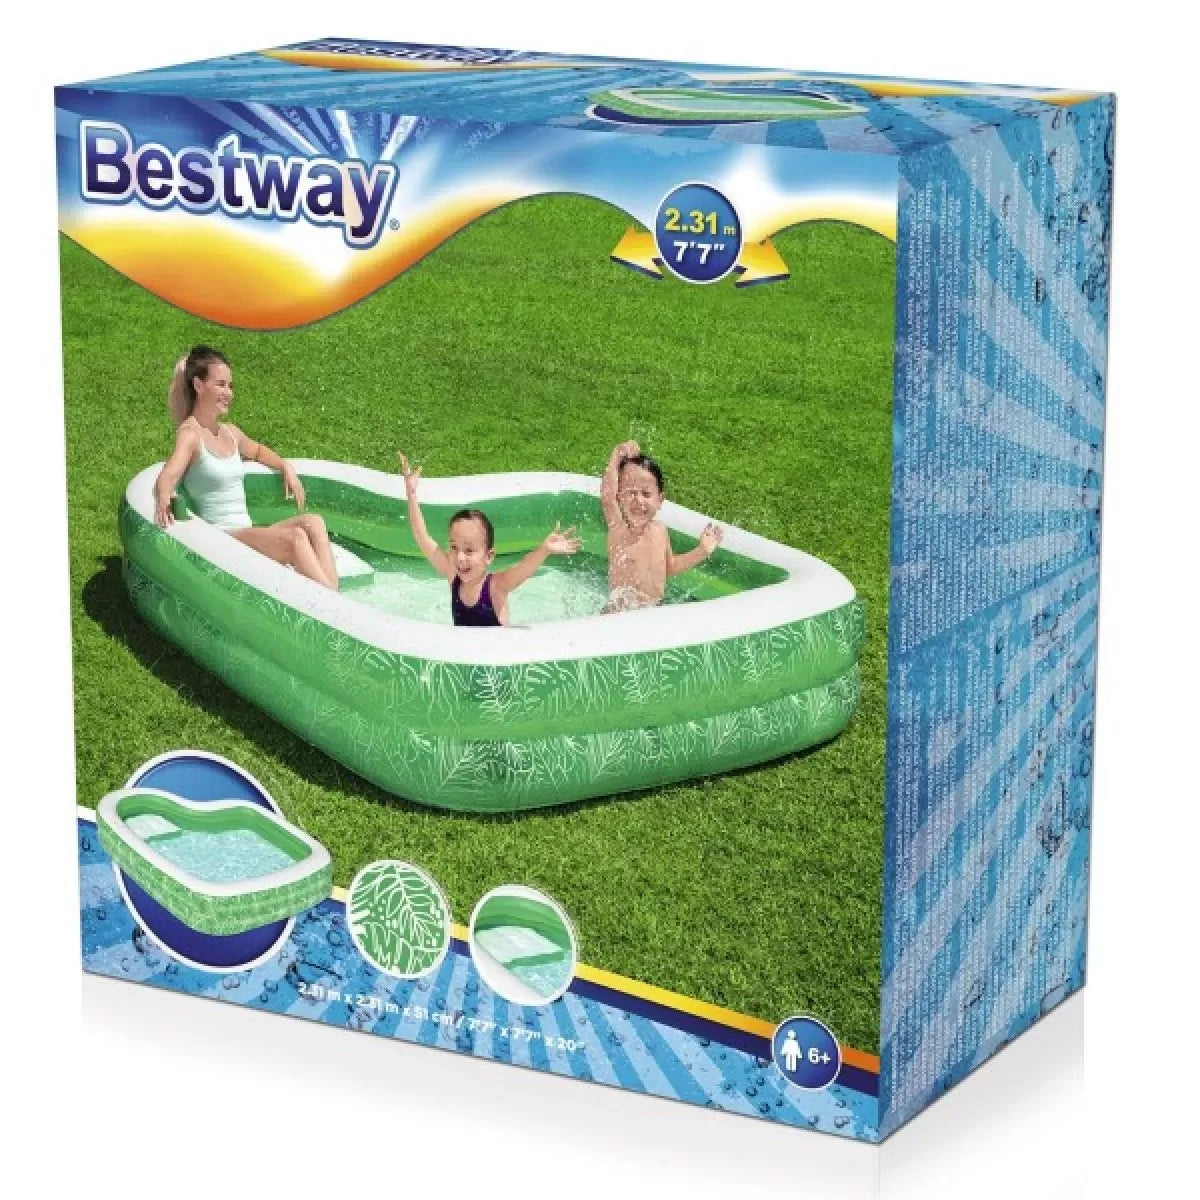 BESTWAY Tropical Family Paradise Swimming Pool For Kids 7ft 7in x 7ft 7in x 1ft 8in